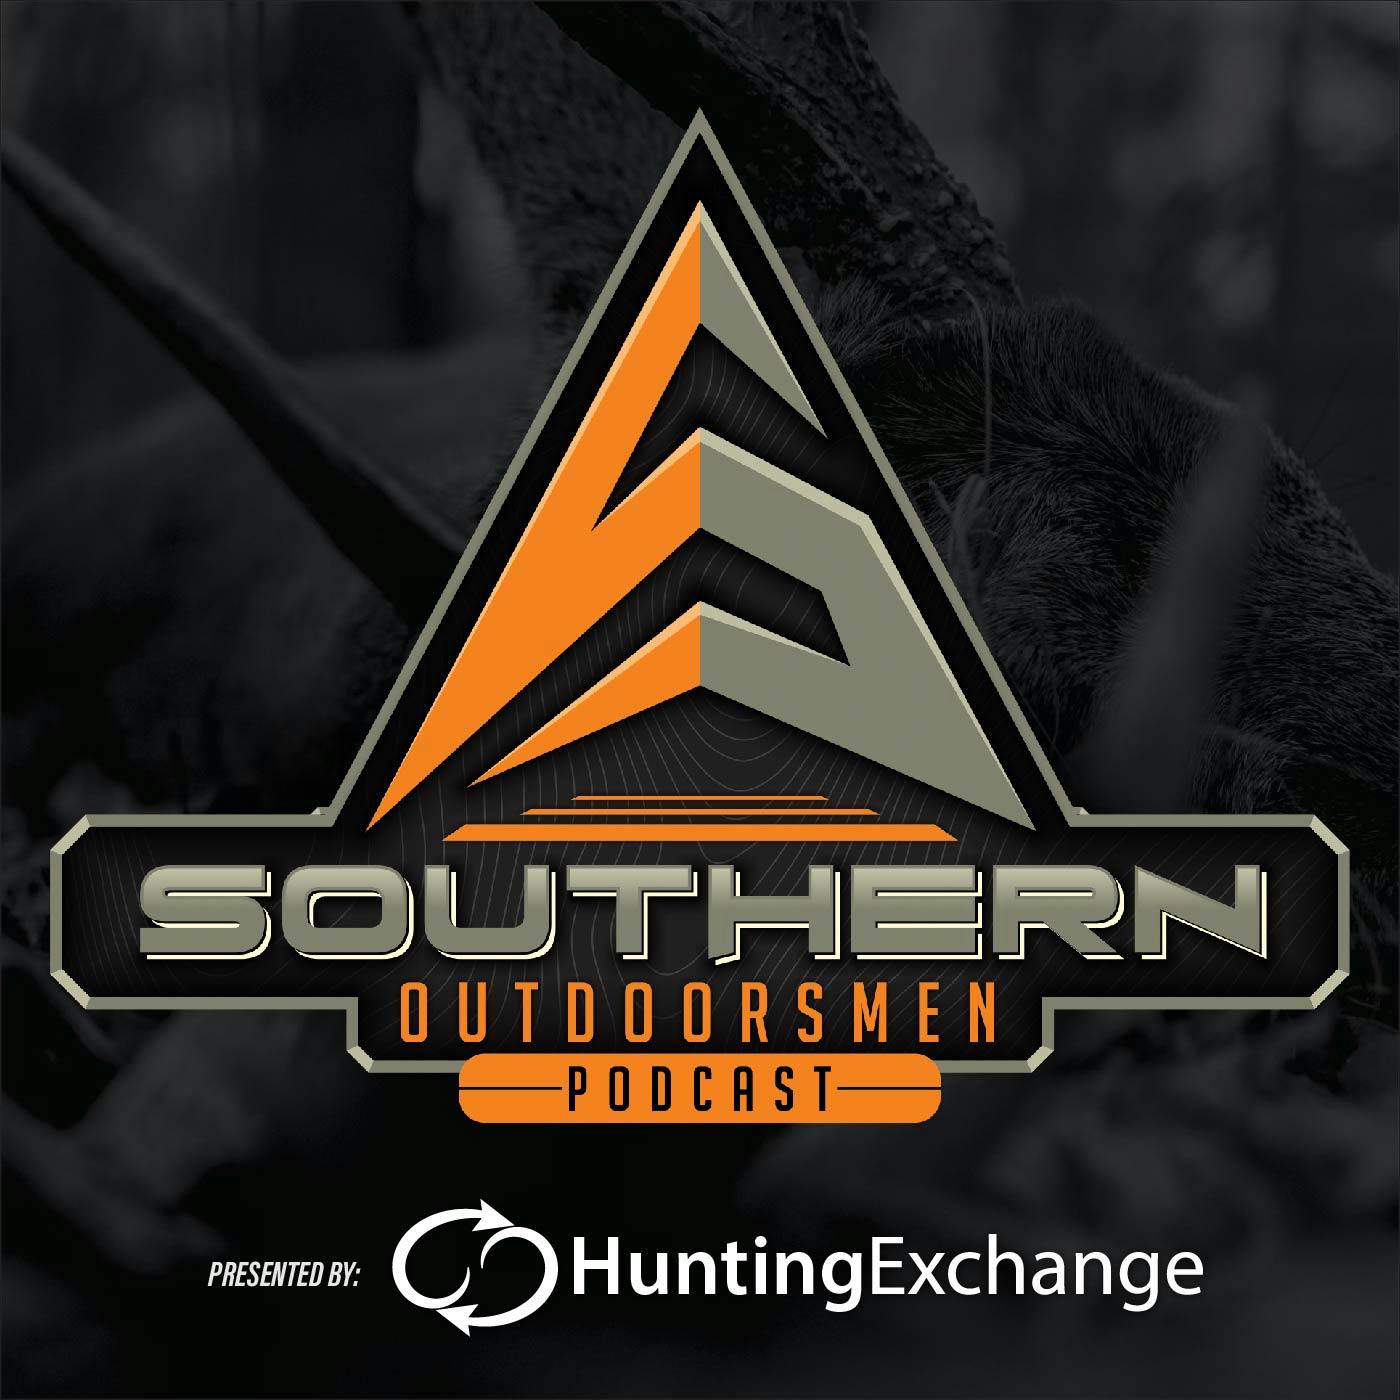 Ep. 280 - Why Your Deer Hunting Tactics HAVENT BEEN WORKING with David Toms